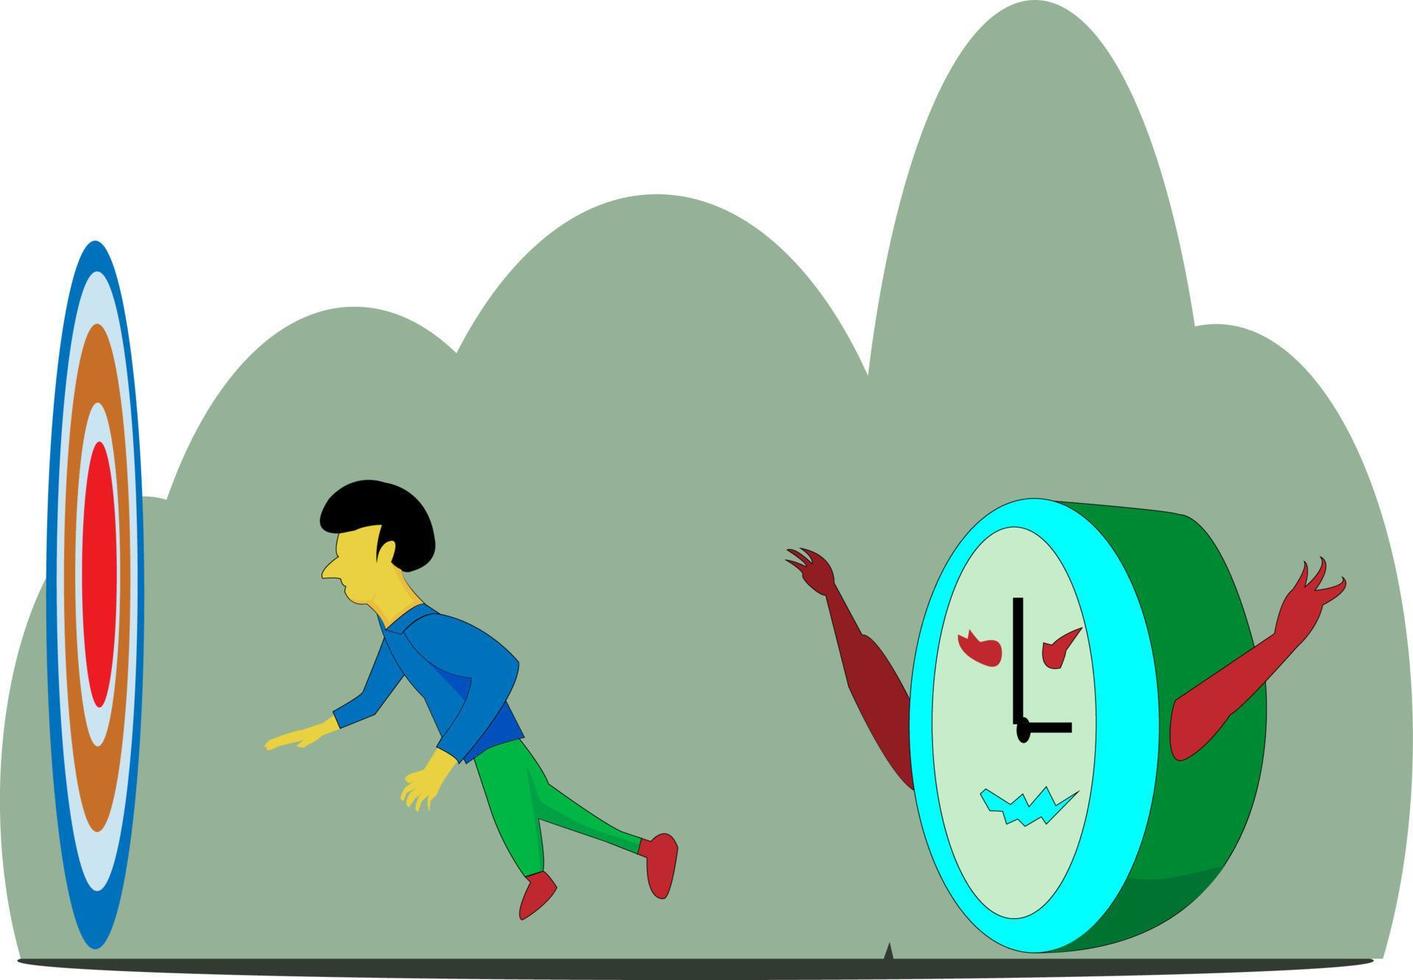 illustration of deadline, someone is being rushed for work, chasing a target, being chased by a clock. flat style vector